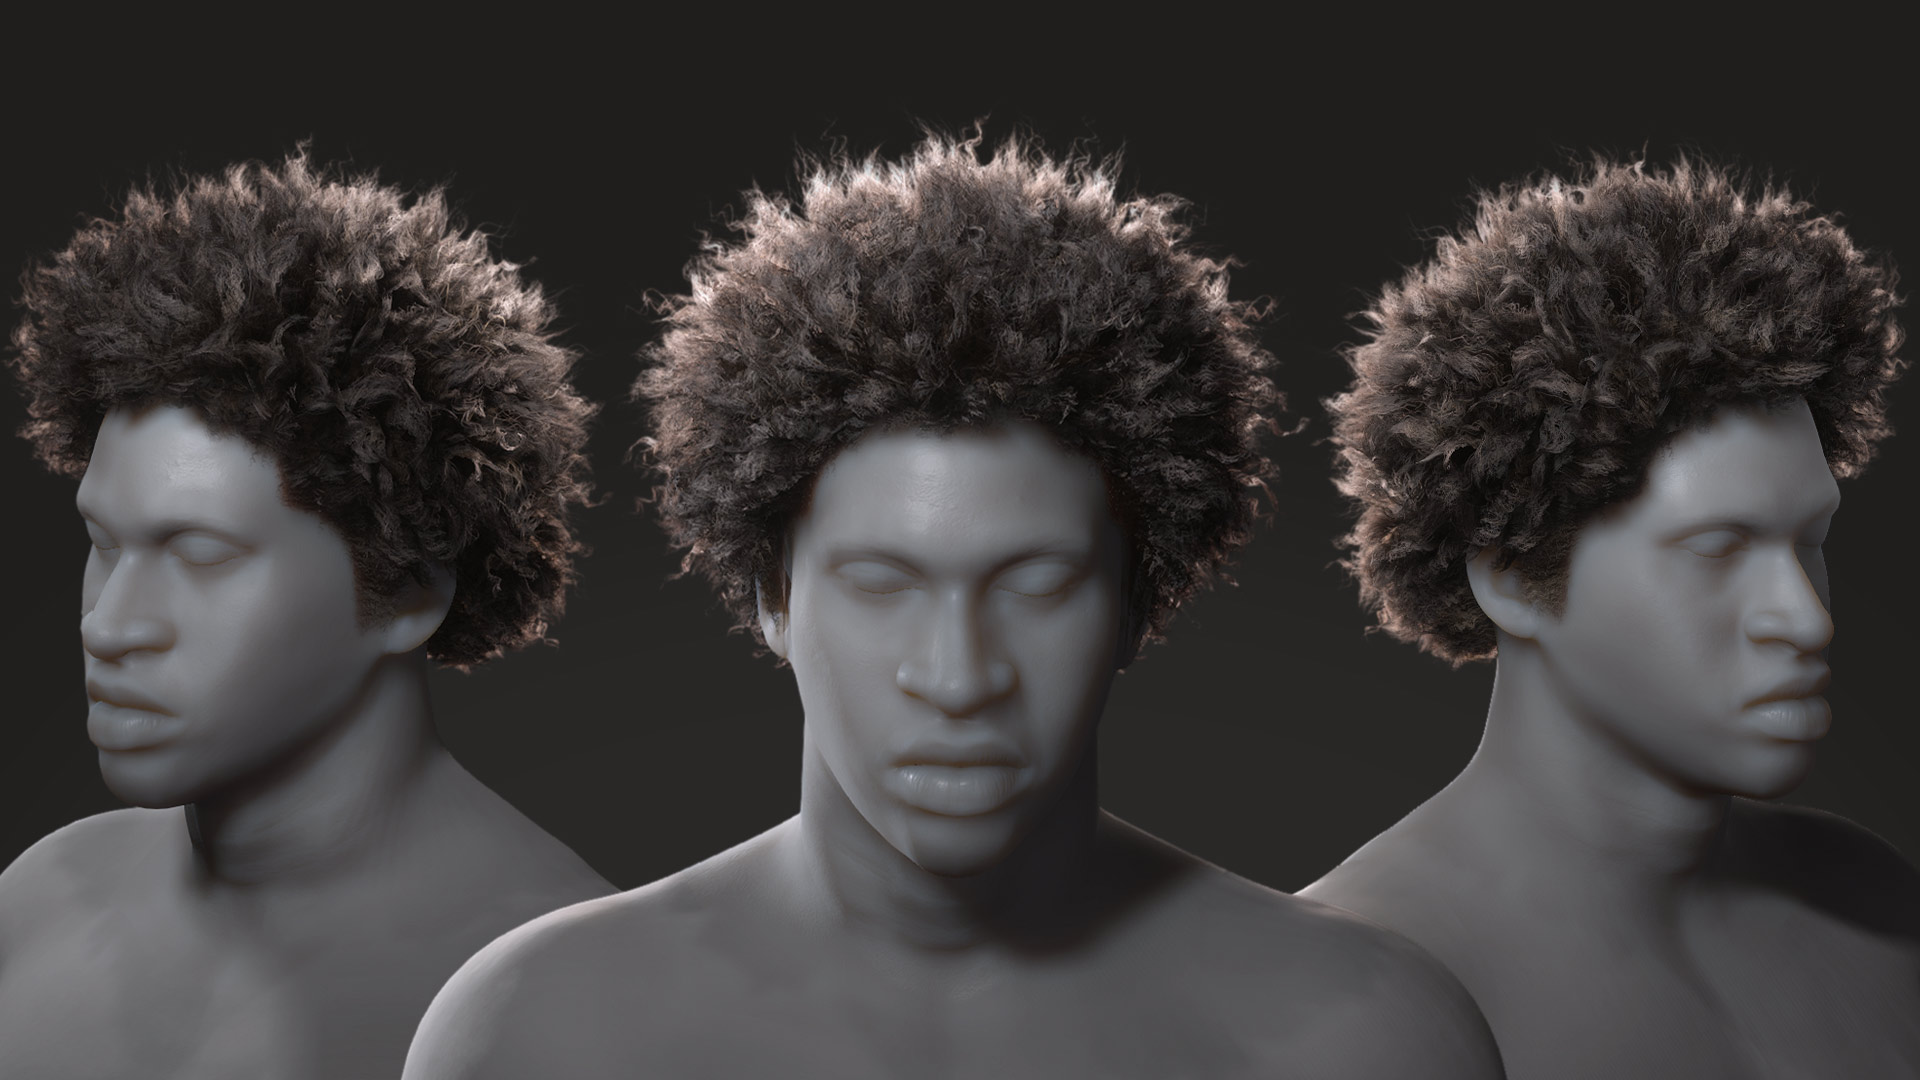 Medium Afro Hair - Character Creator/Hair - Reallusion Content Store